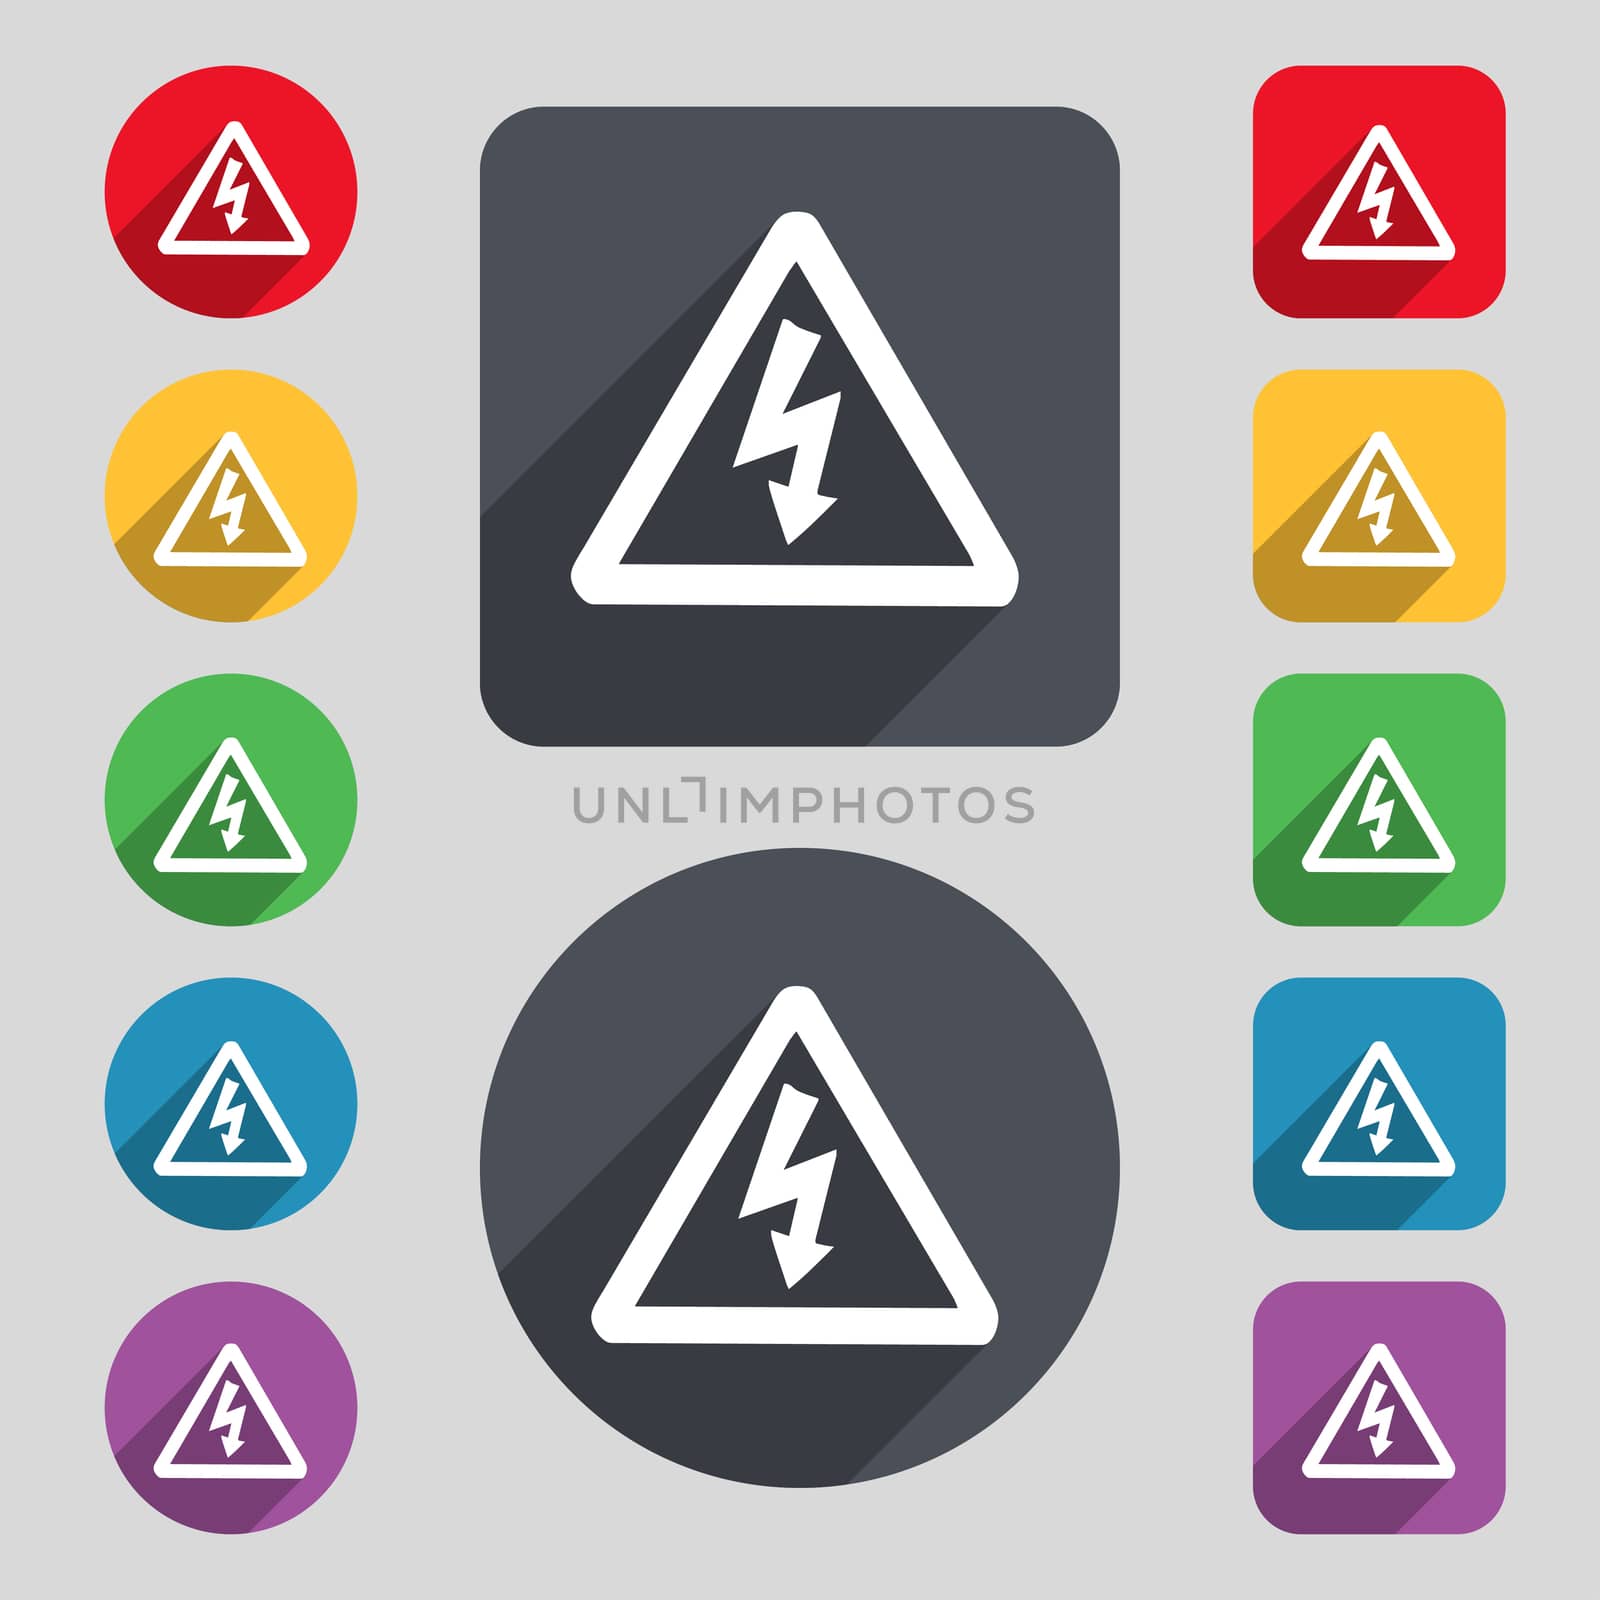 voltage icon sign. A set of 12 colored buttons and a long shadow. Flat design. illustration